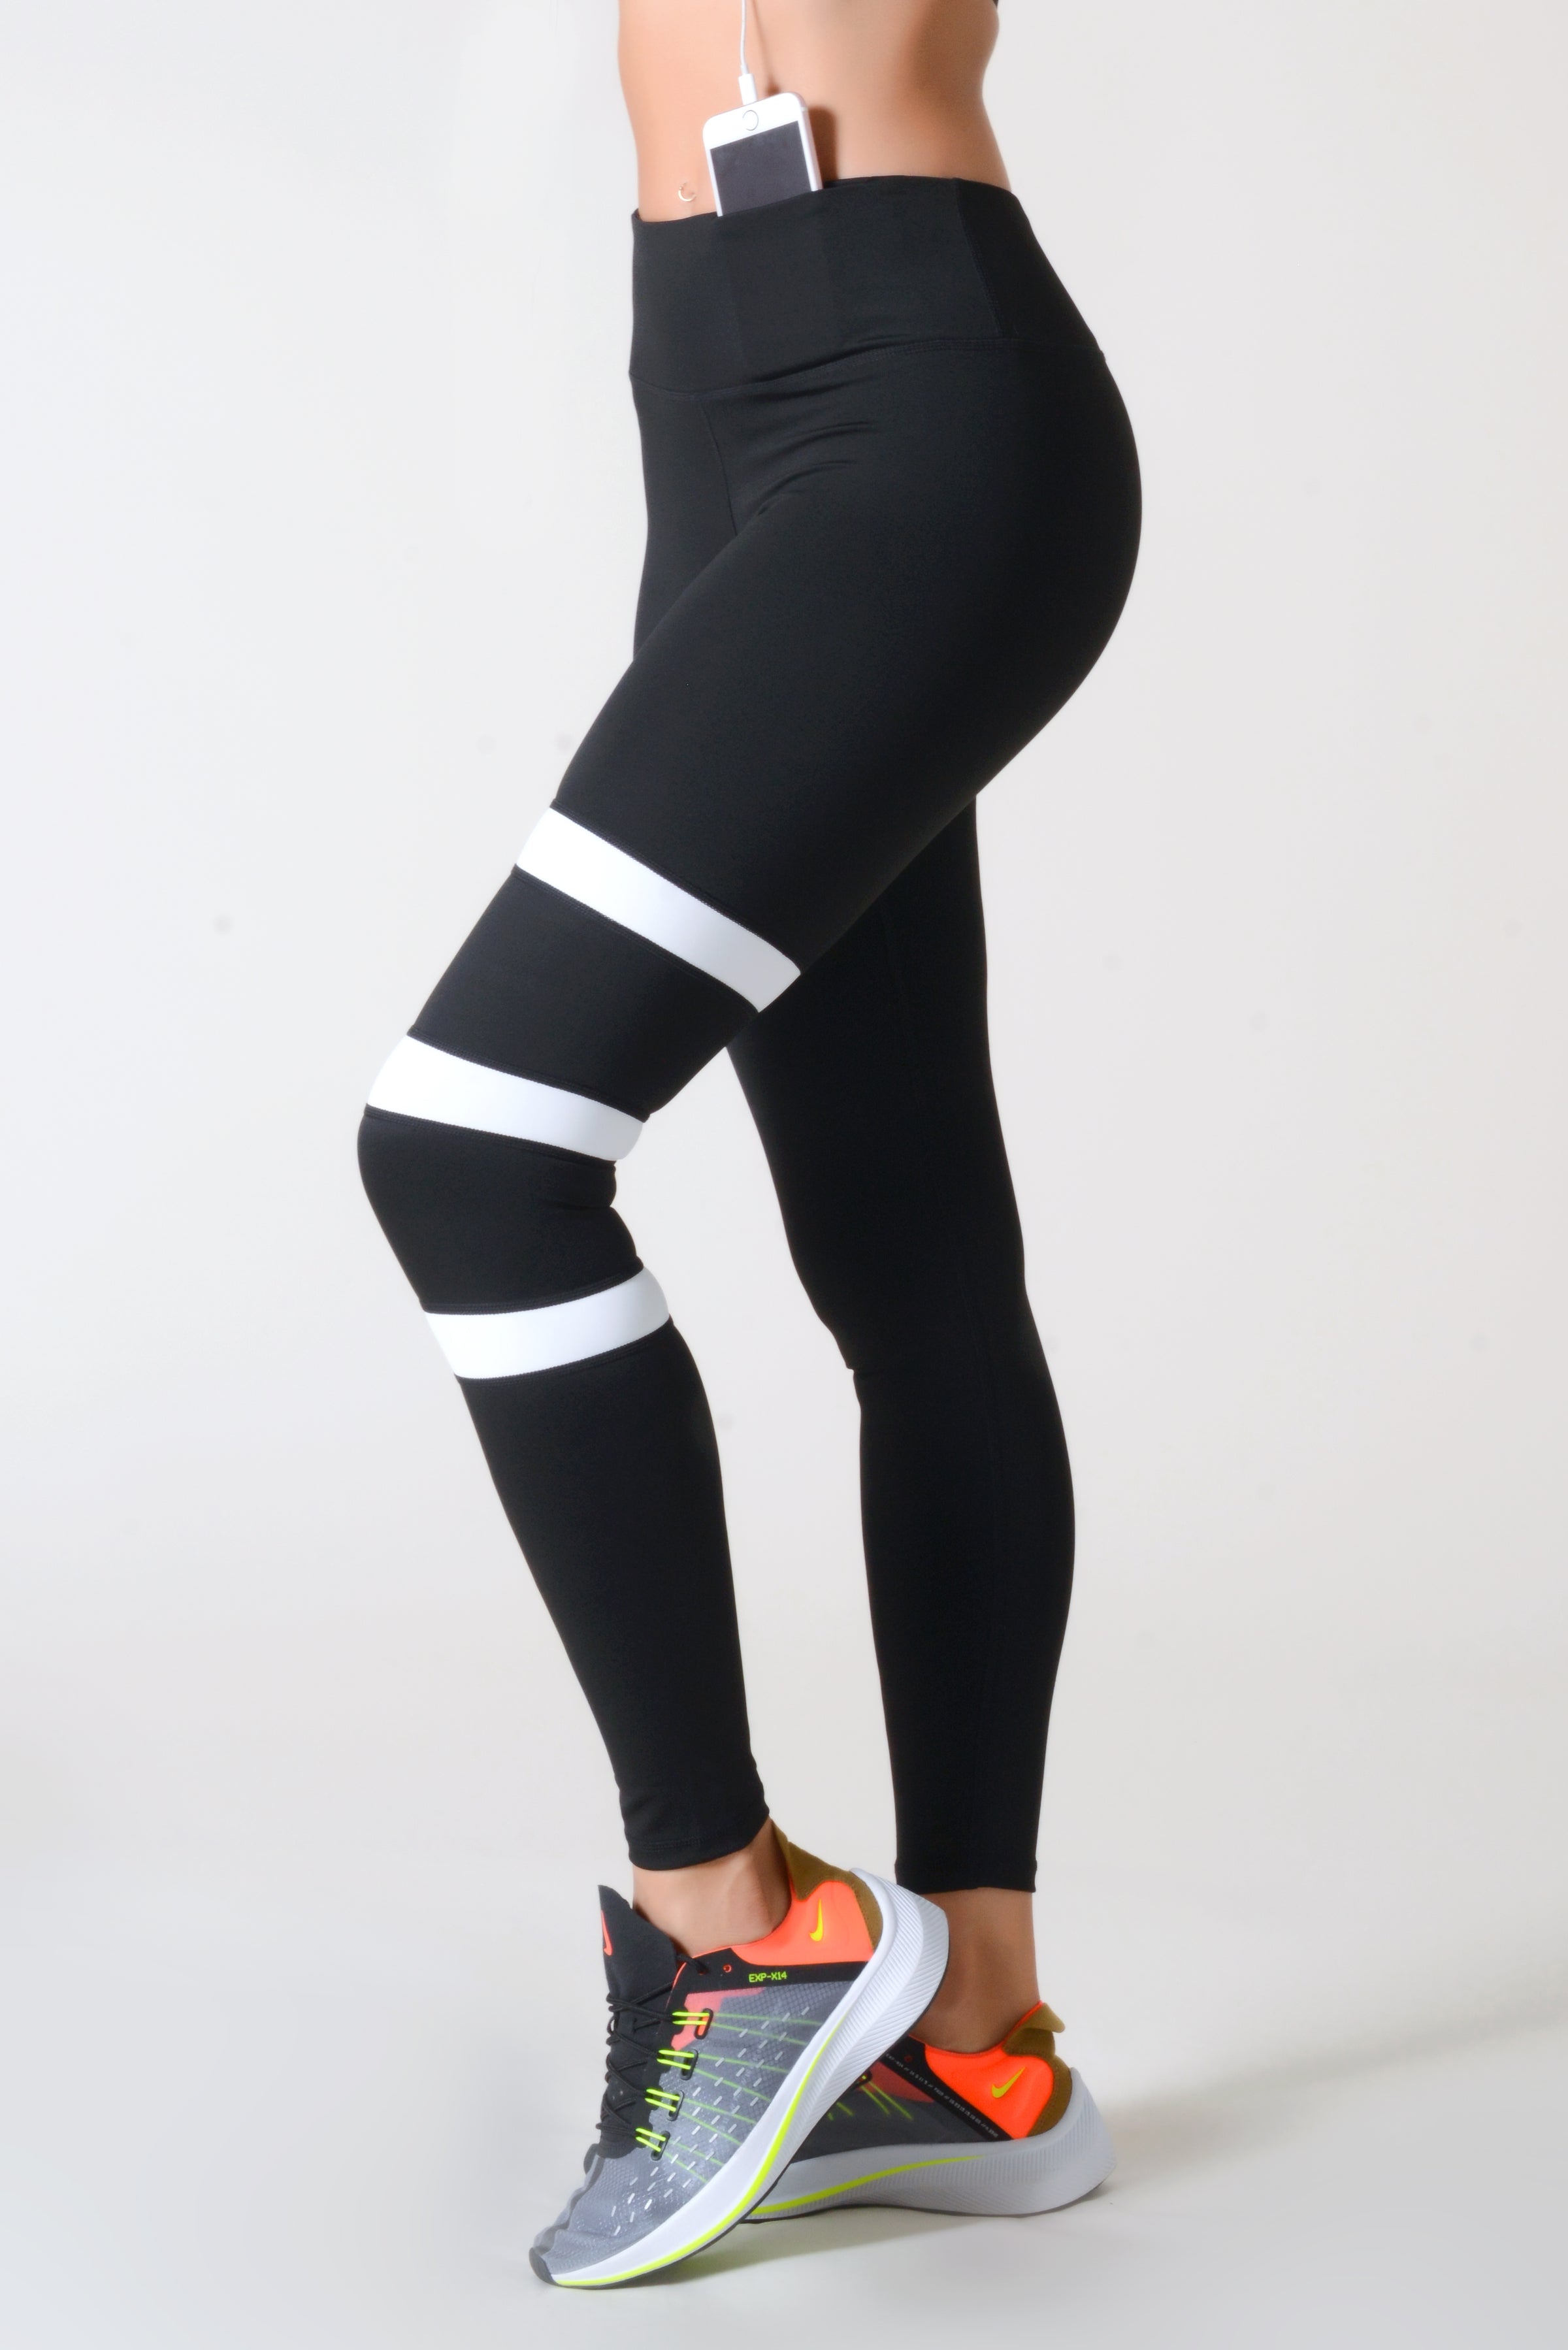 Readability loom creative striped workout tights 